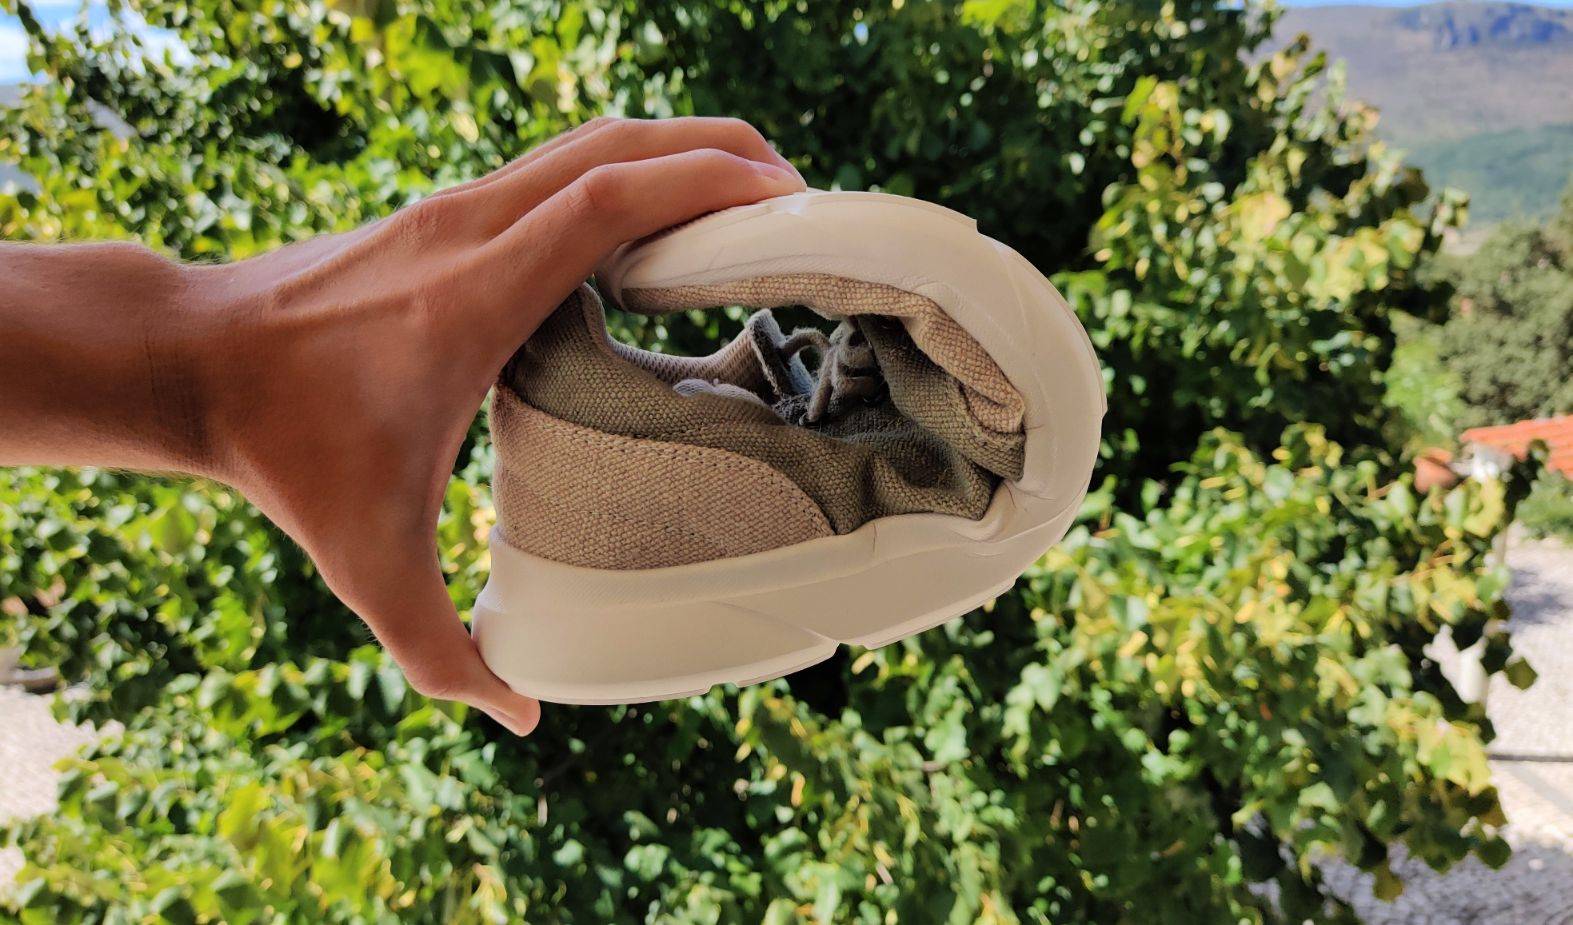 Strong and flexible hemp: hemp shoe being folded to show its flexibility